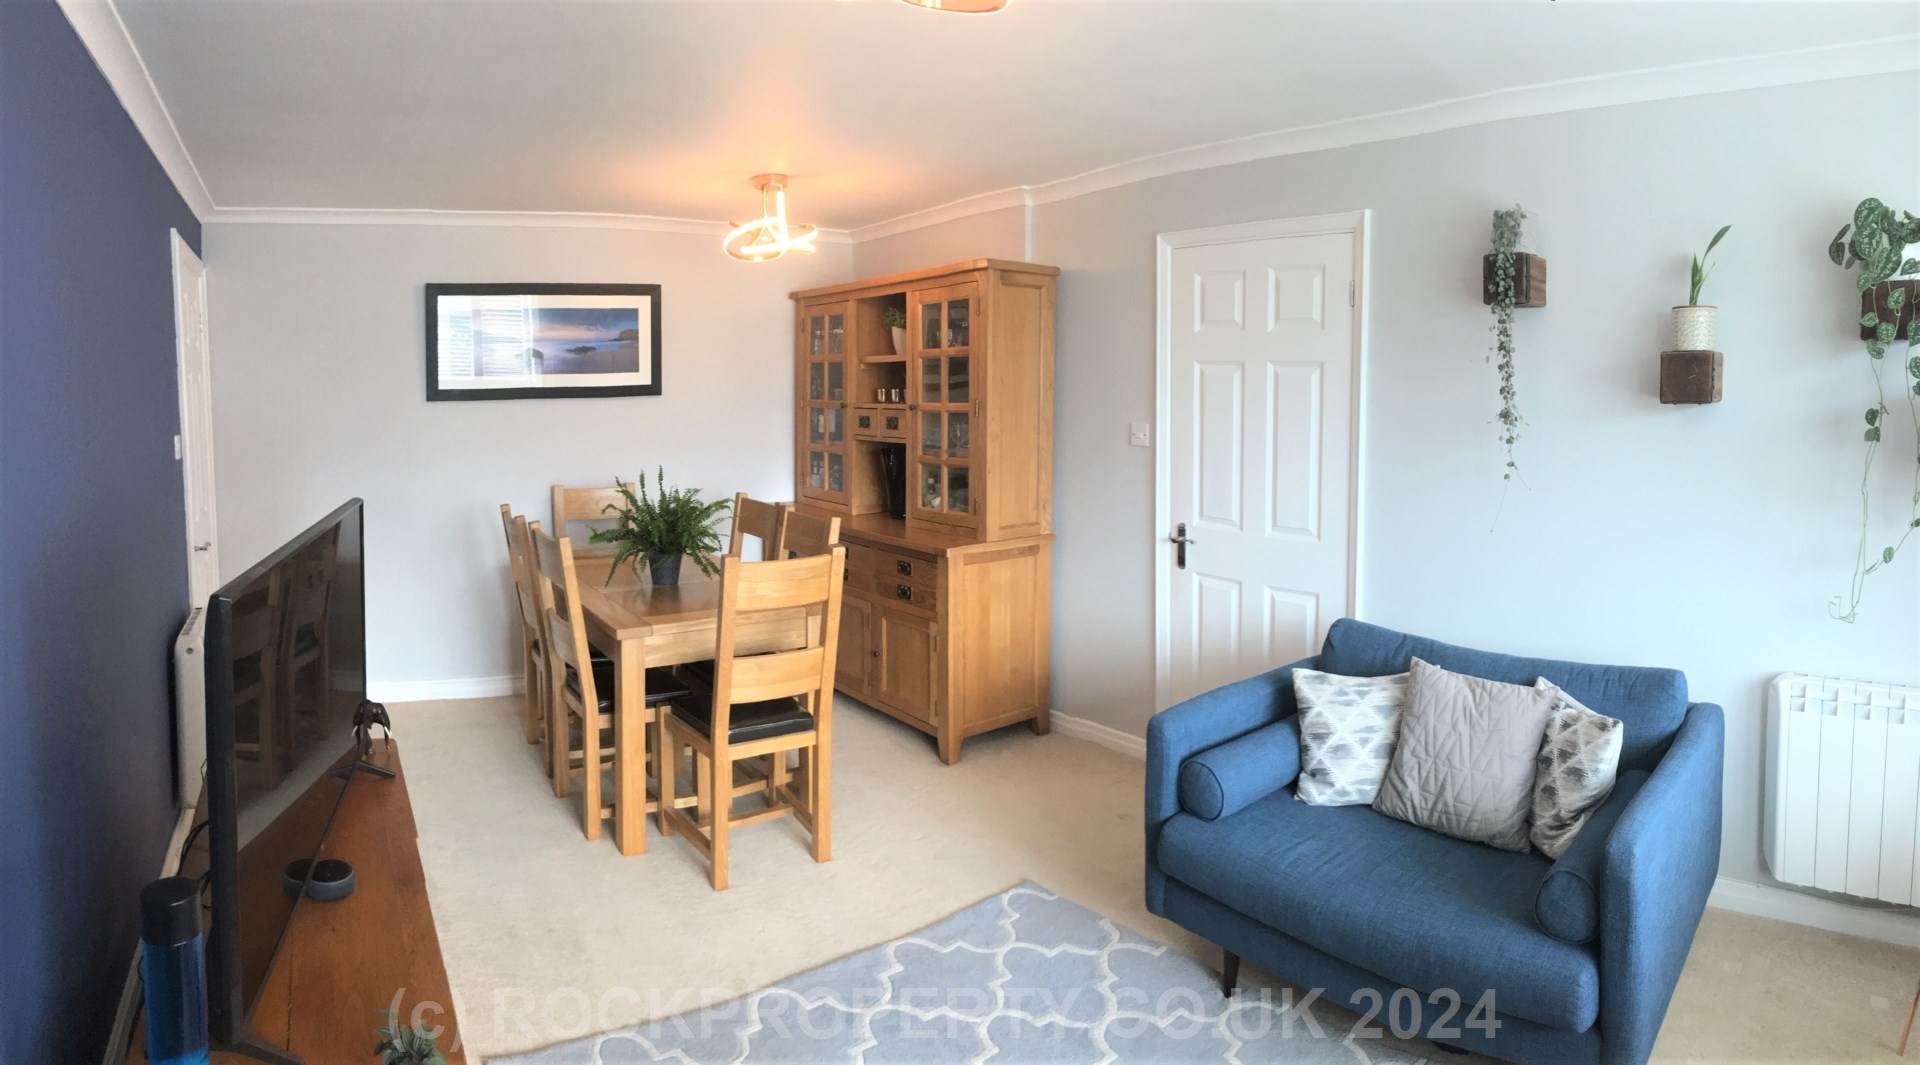 IMMACULATE 1 BED FLAT, Havre Des Pas, St Helier, Image 6